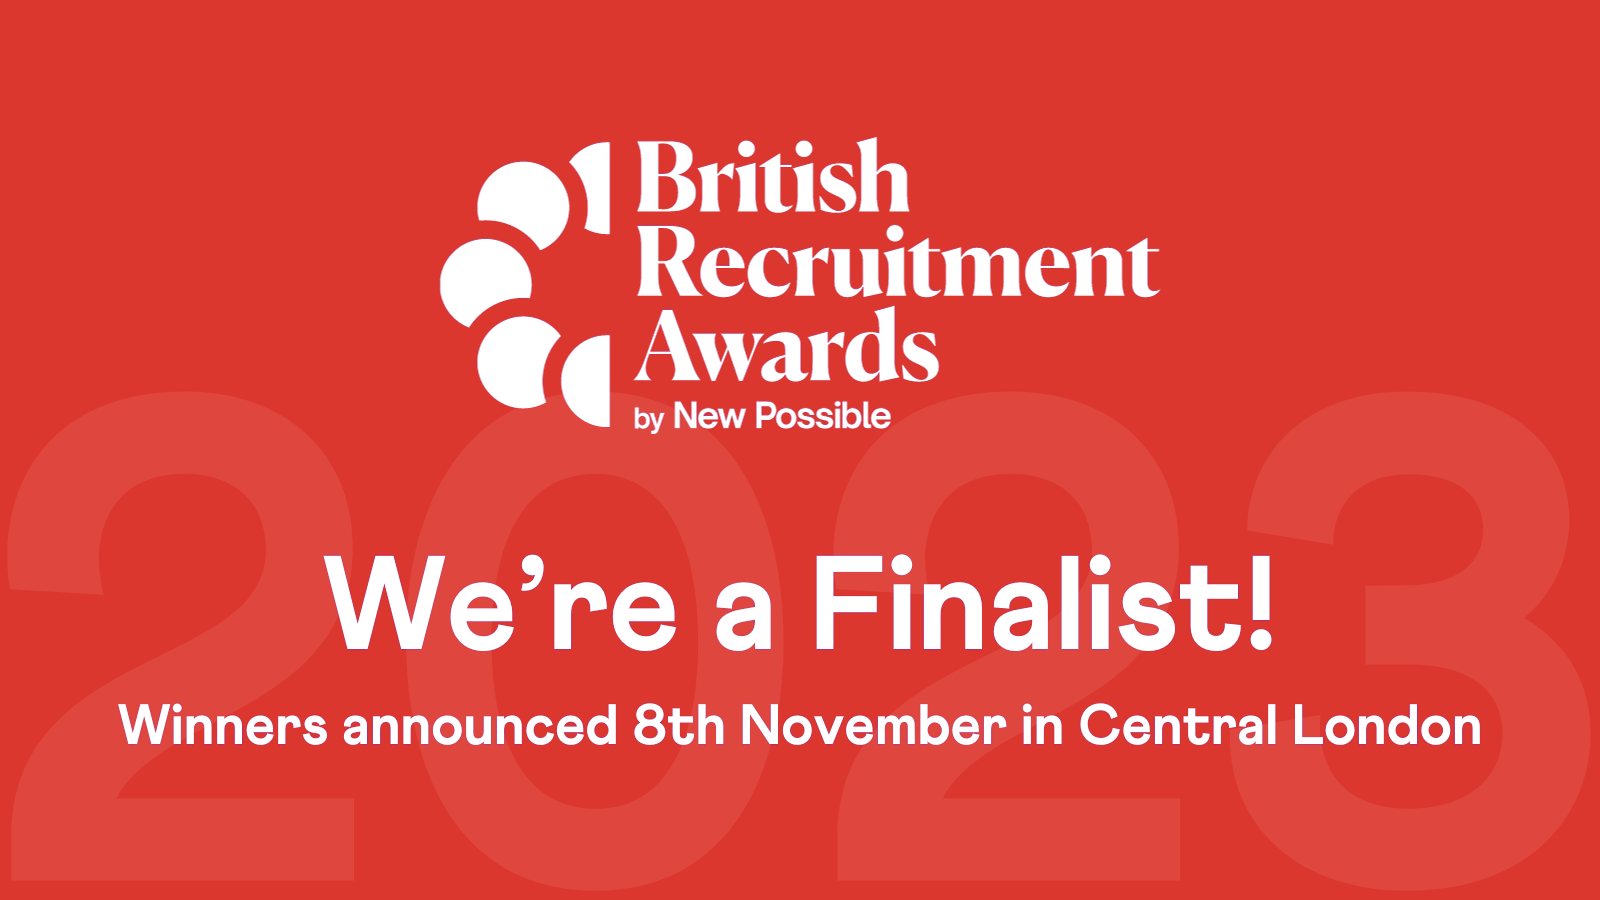 We are finalist!